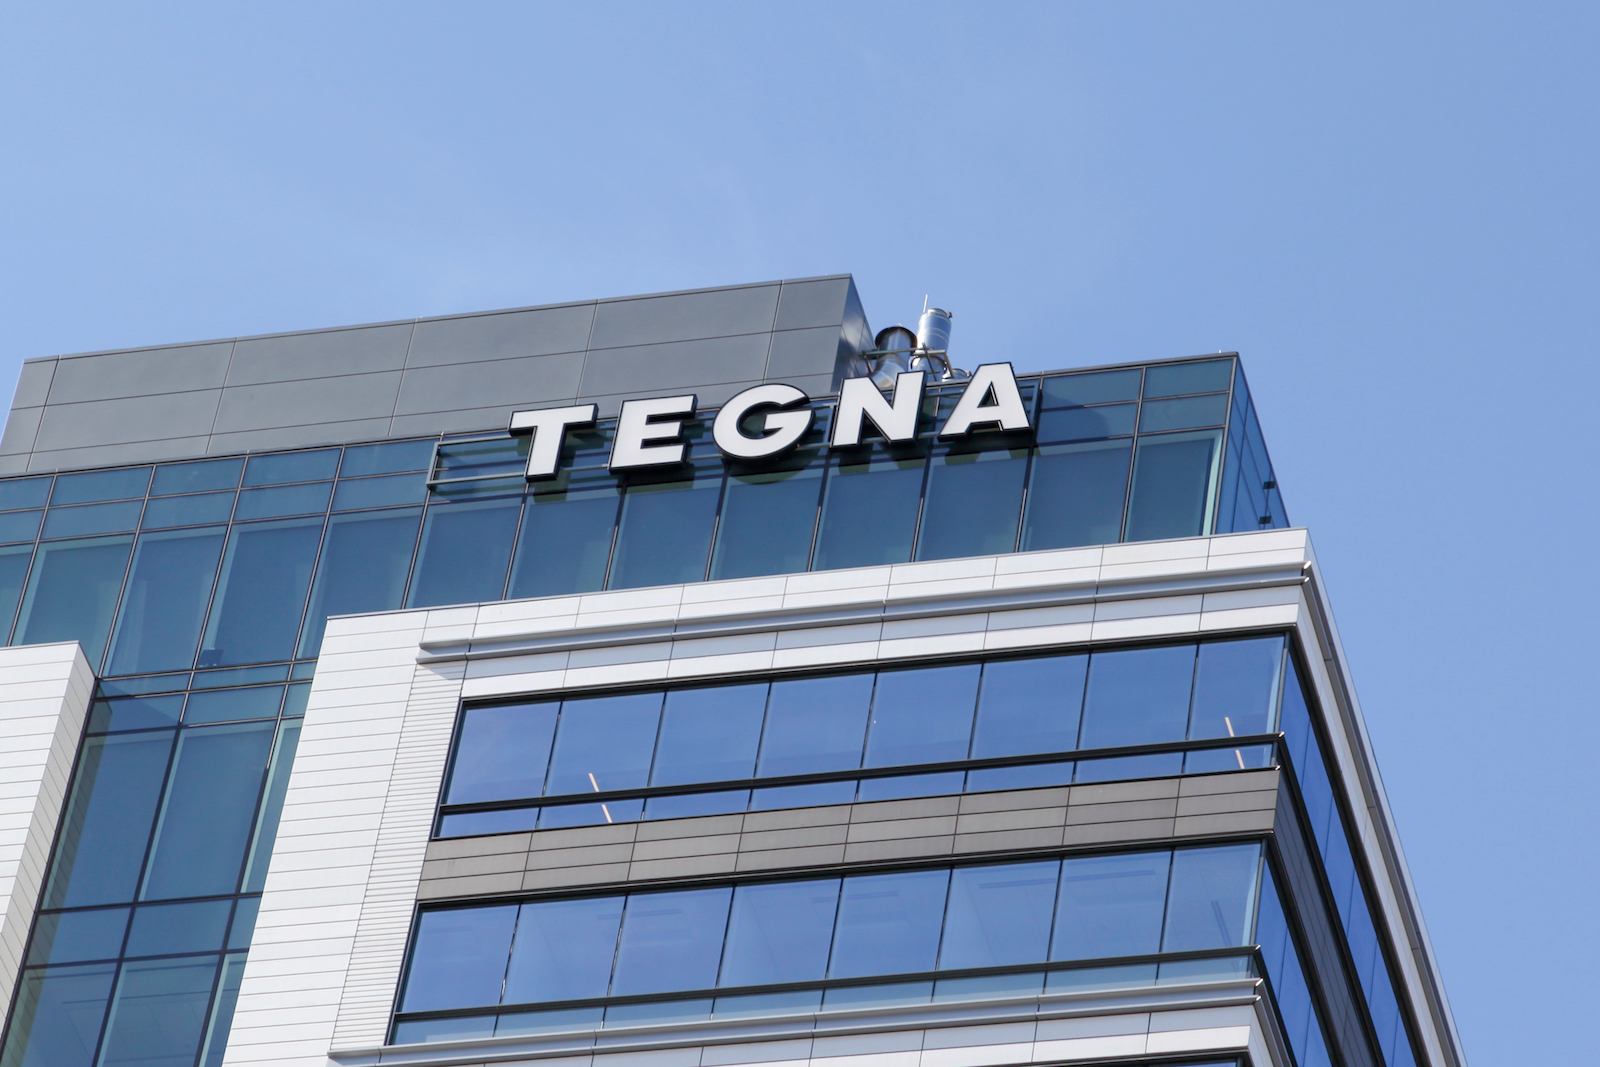 Tegna sign on building